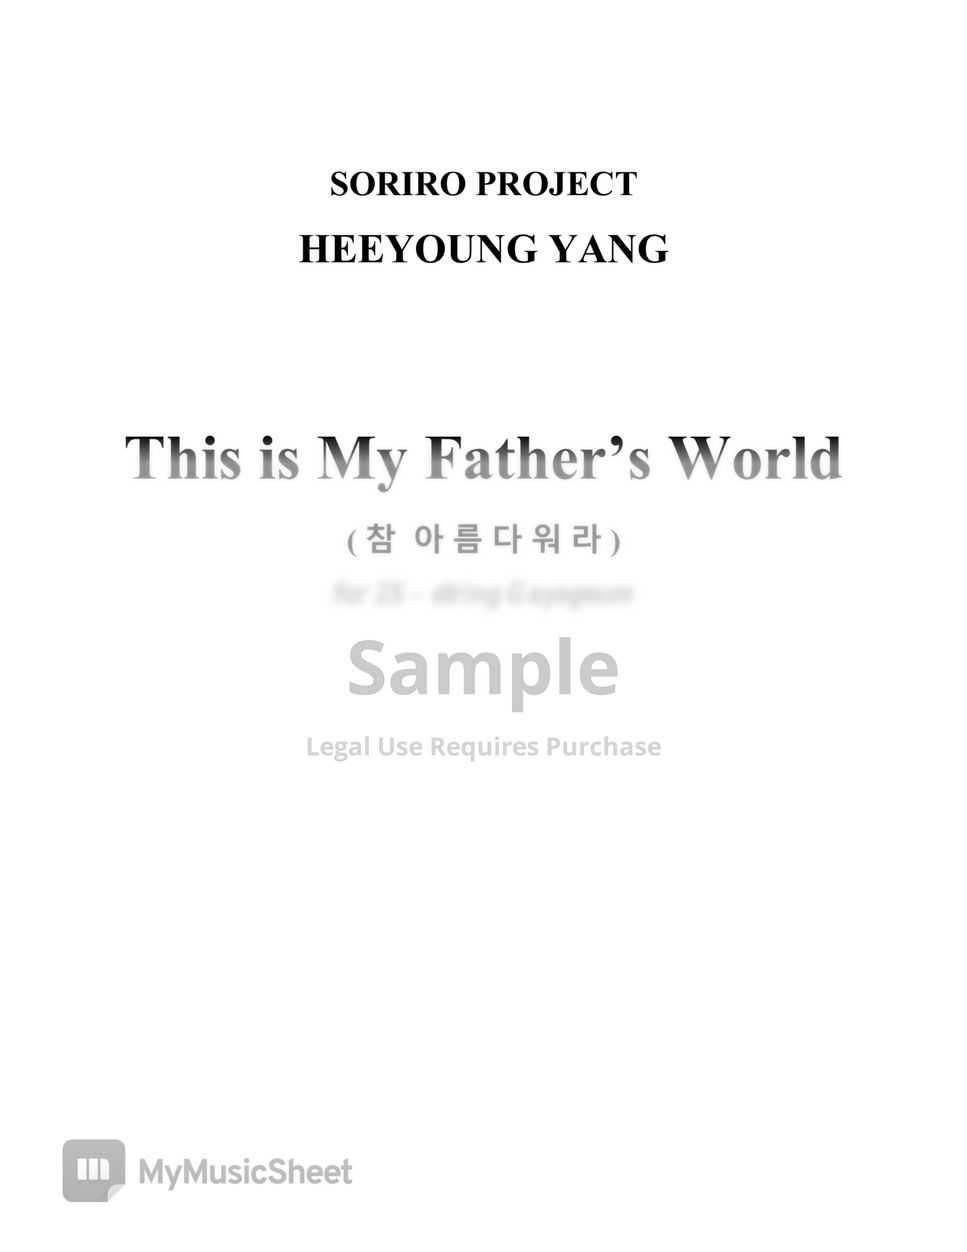 Heeyoung Yang - This is My Father's World for 25-string Gayageum by Heeyoung Yang